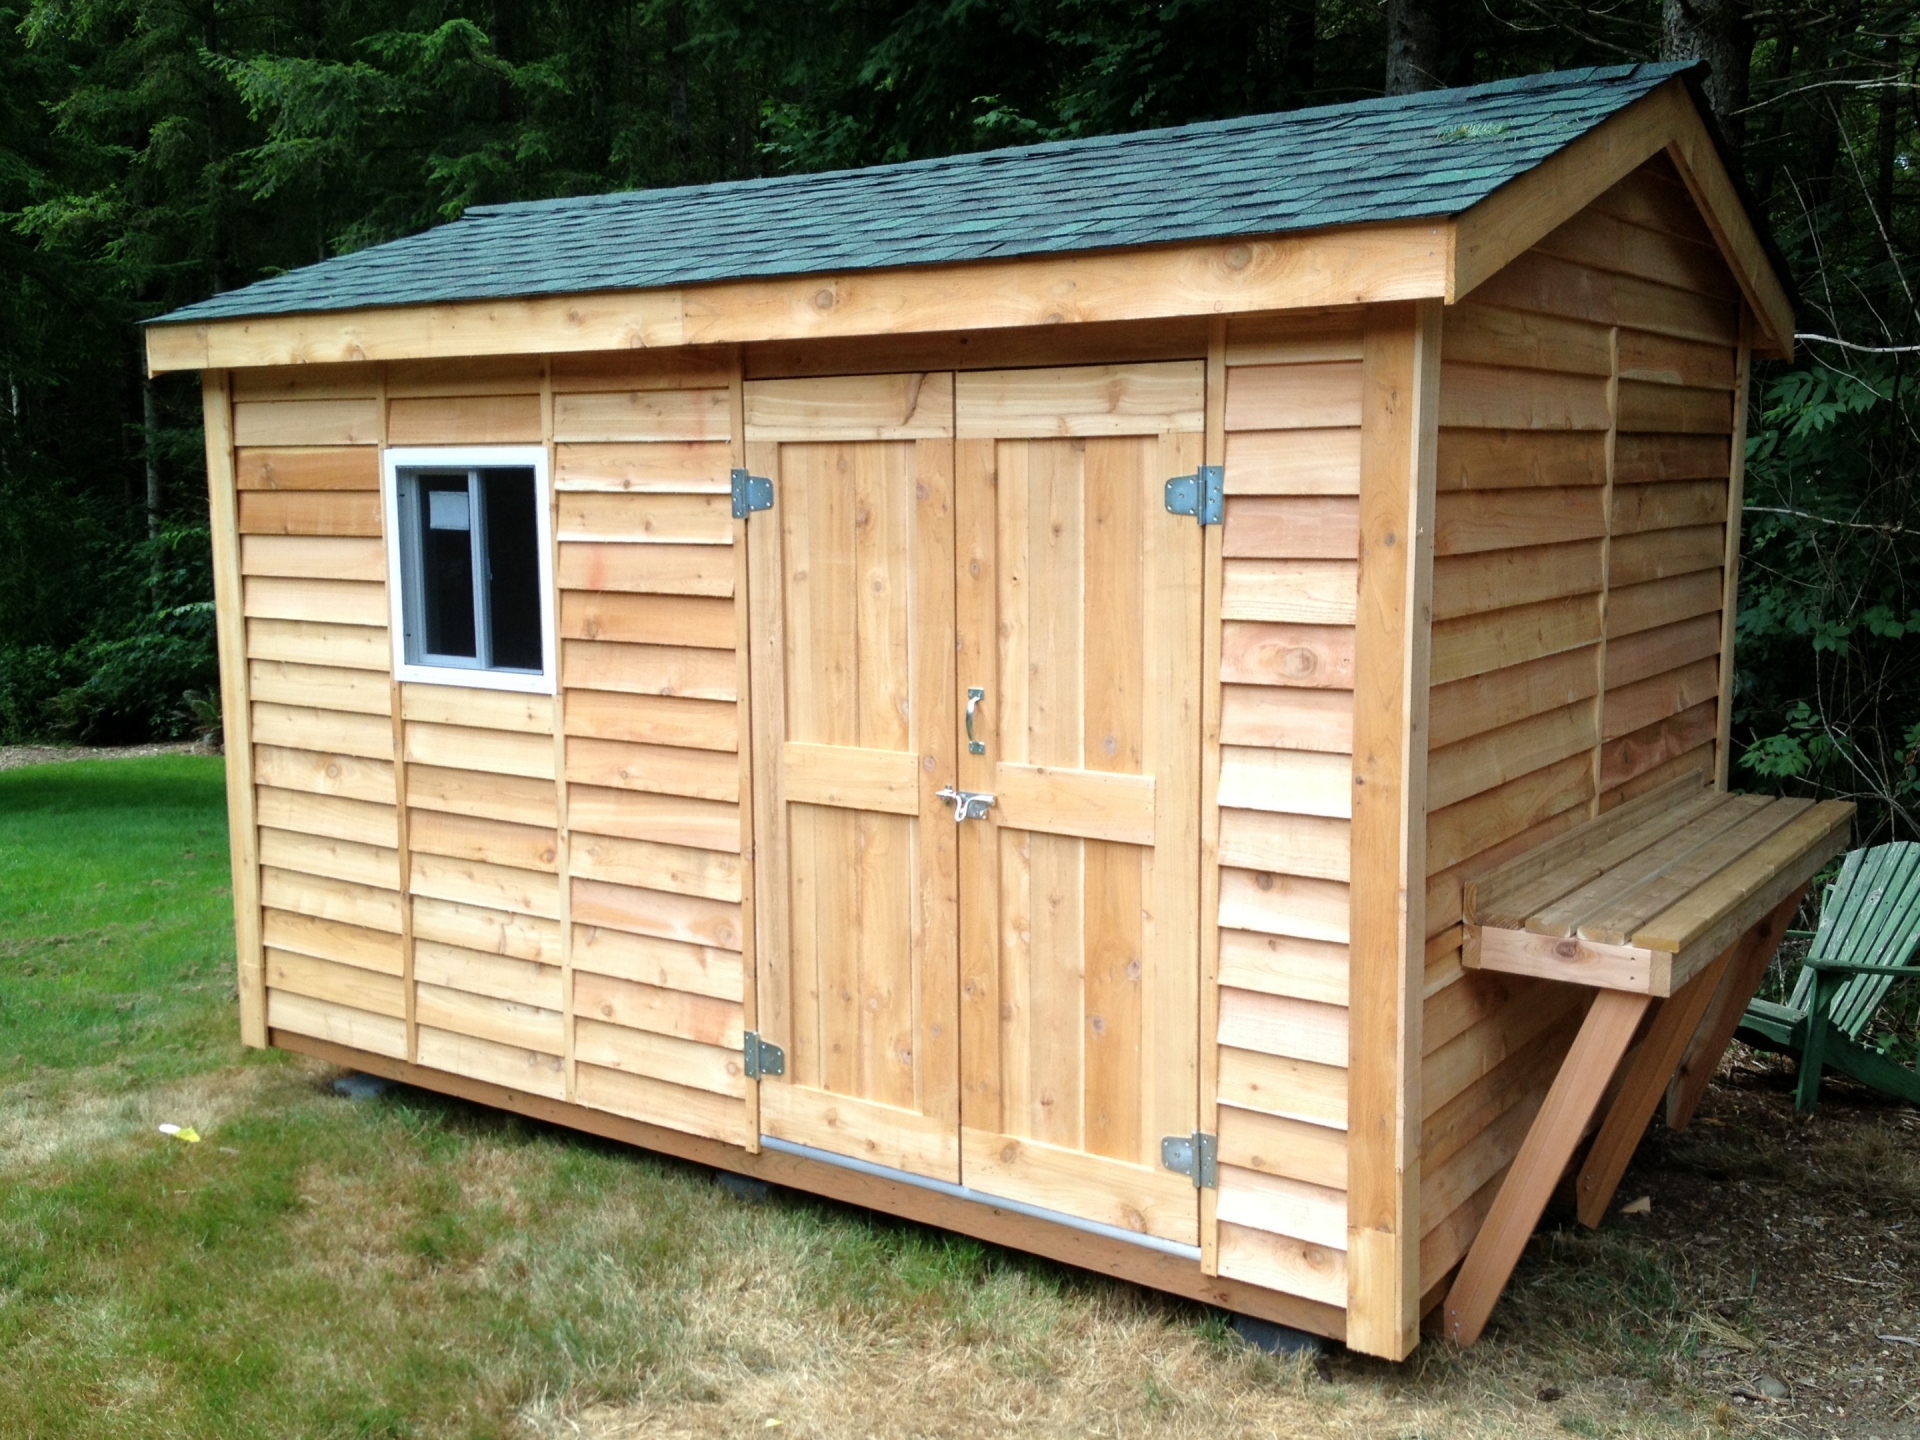 10x12 shed with side porch plans myoutdoorplans free